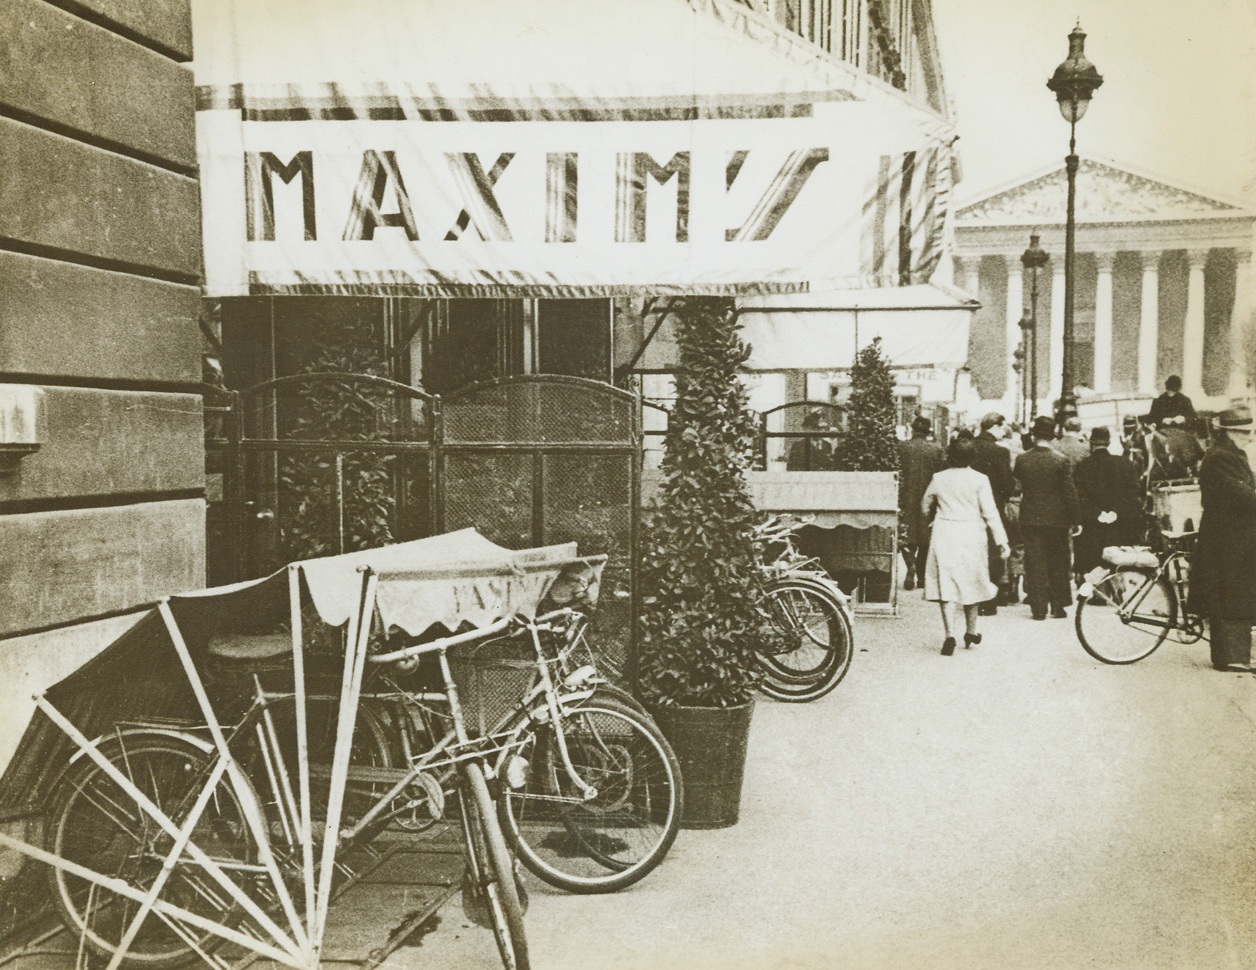 ”I’m Going to Maxim’s” – On a Bicycle, 9/2/1943. Paris – Parisians have almost forgotten what it was like to drive around in motor cars. They get along as best they can with bicycles and horse-drawn vehicles. Typical is this bicycle garage in front of Maxim’s, the night club made famous in story and song. Credit: ACME;